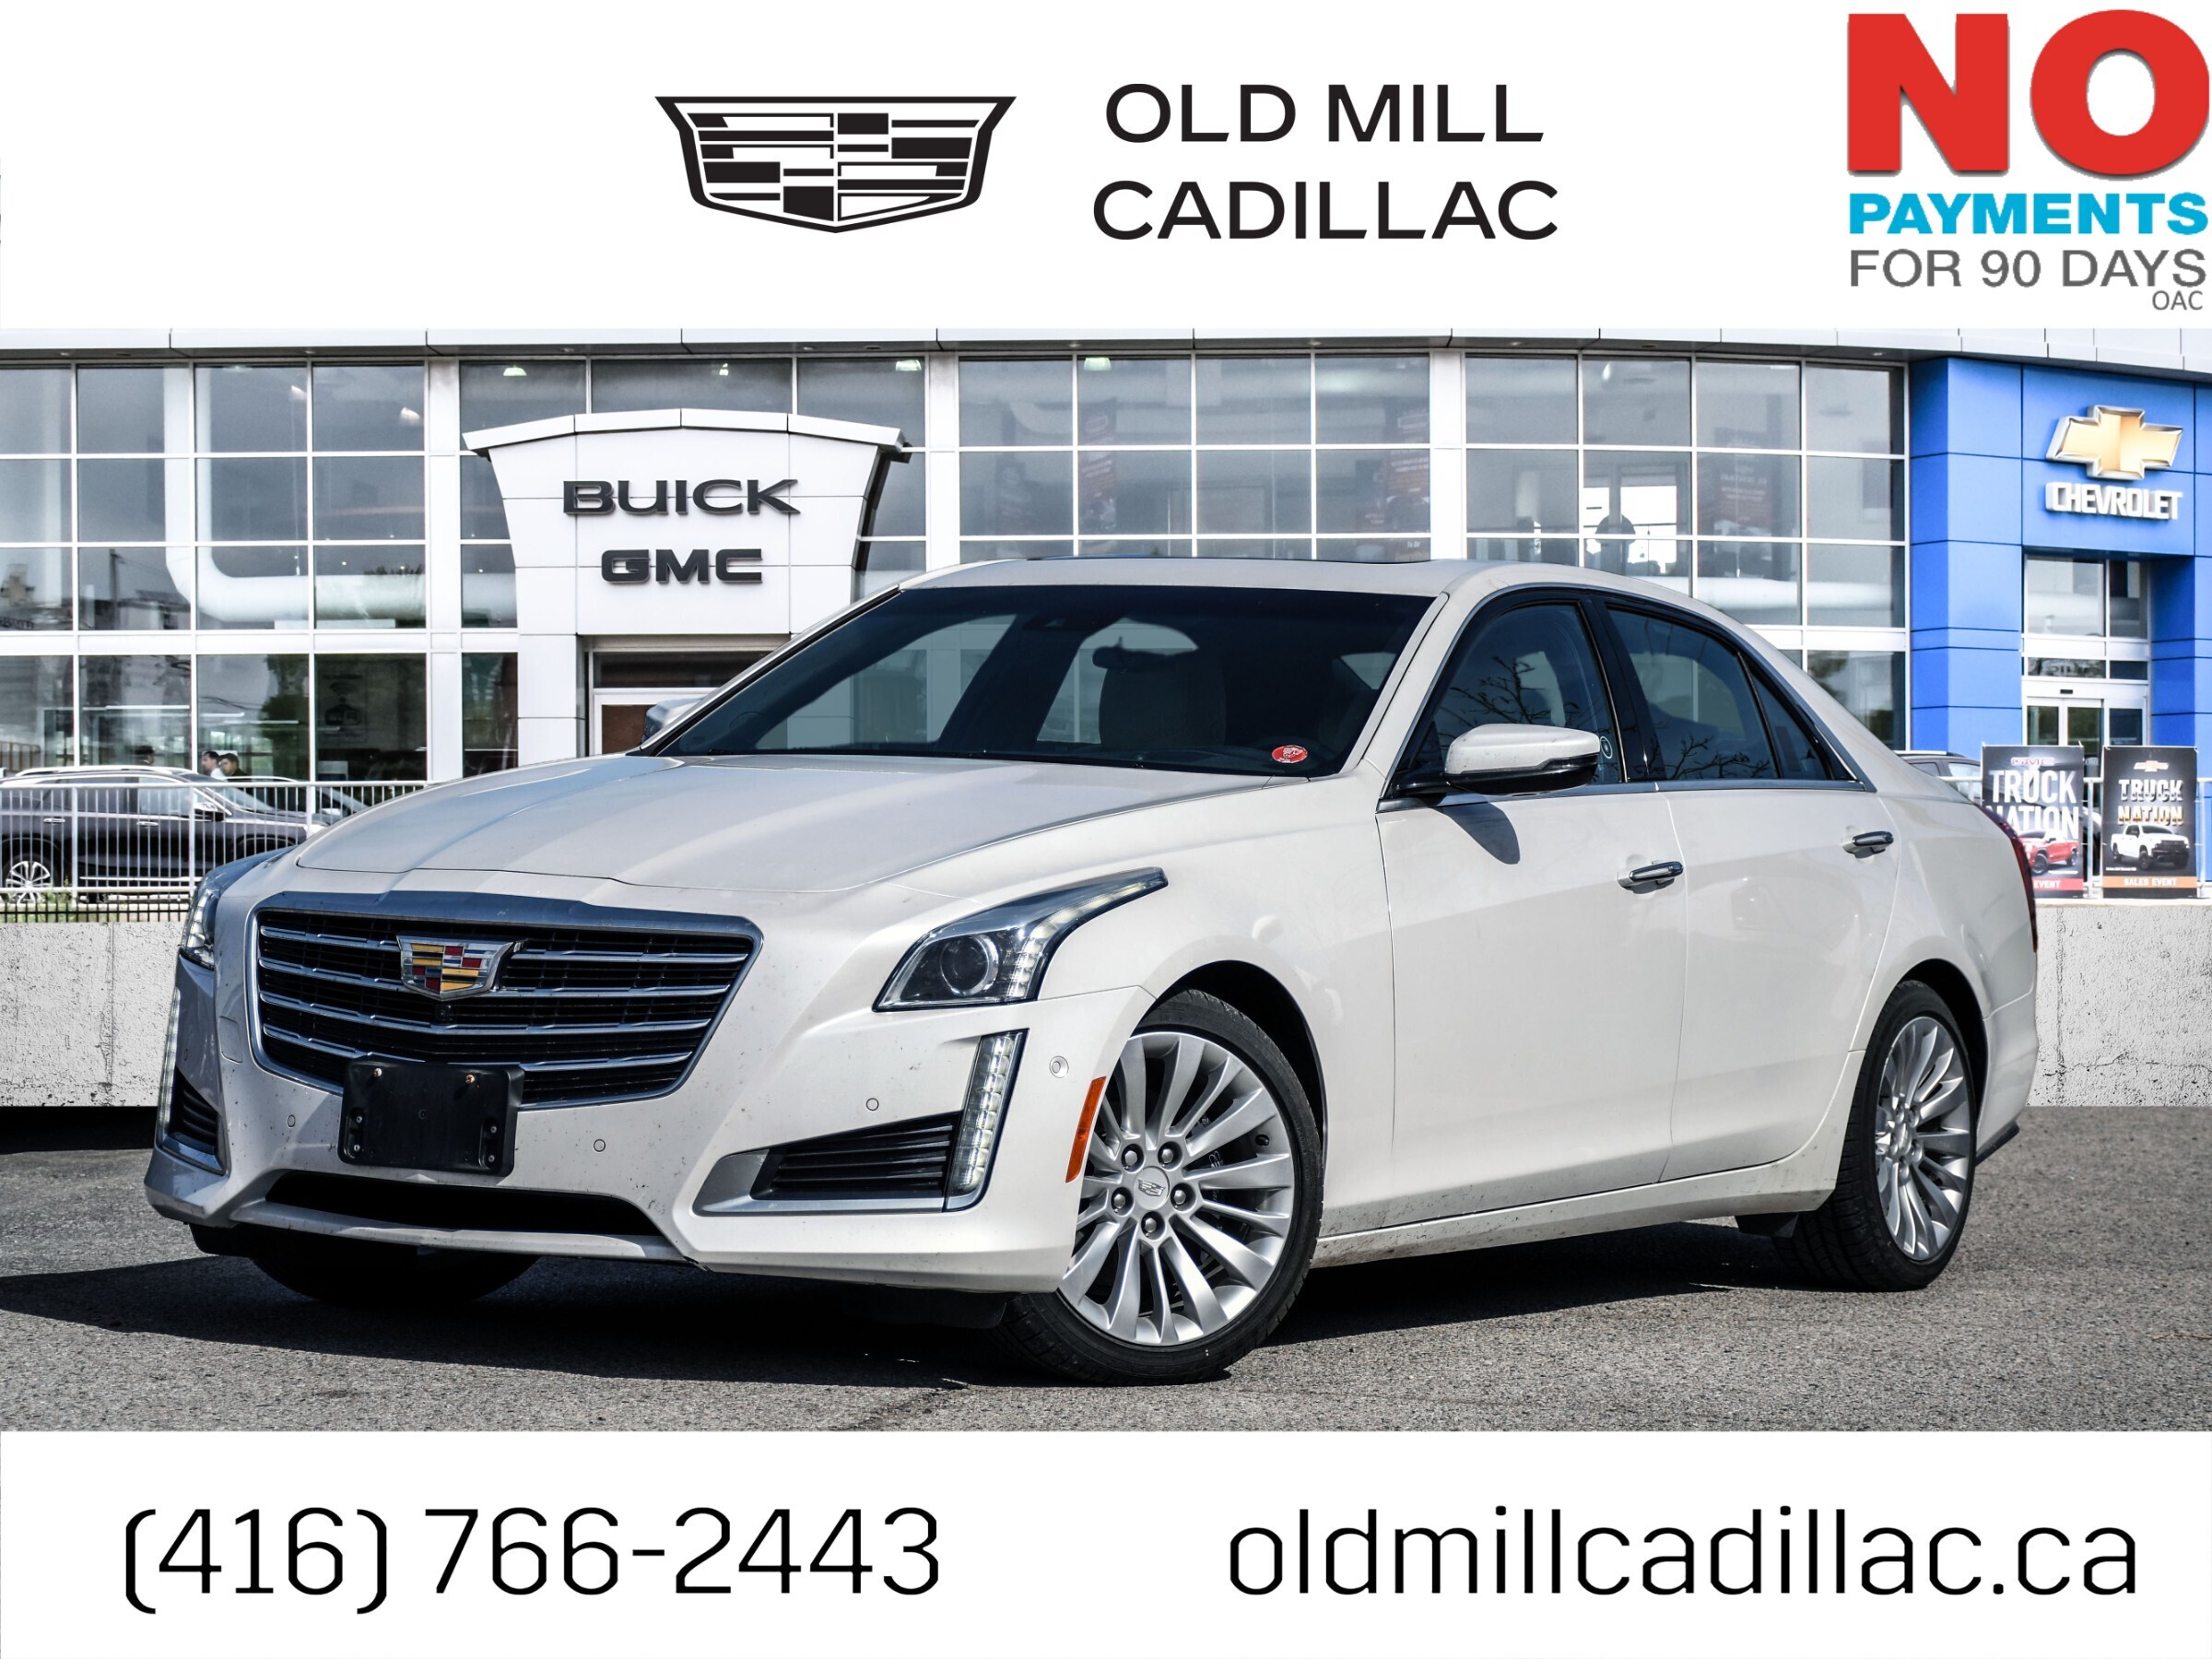 2018 Cadillac CTS CLEAN CARFAX | HUD | 360 CAM | PANO ROOF